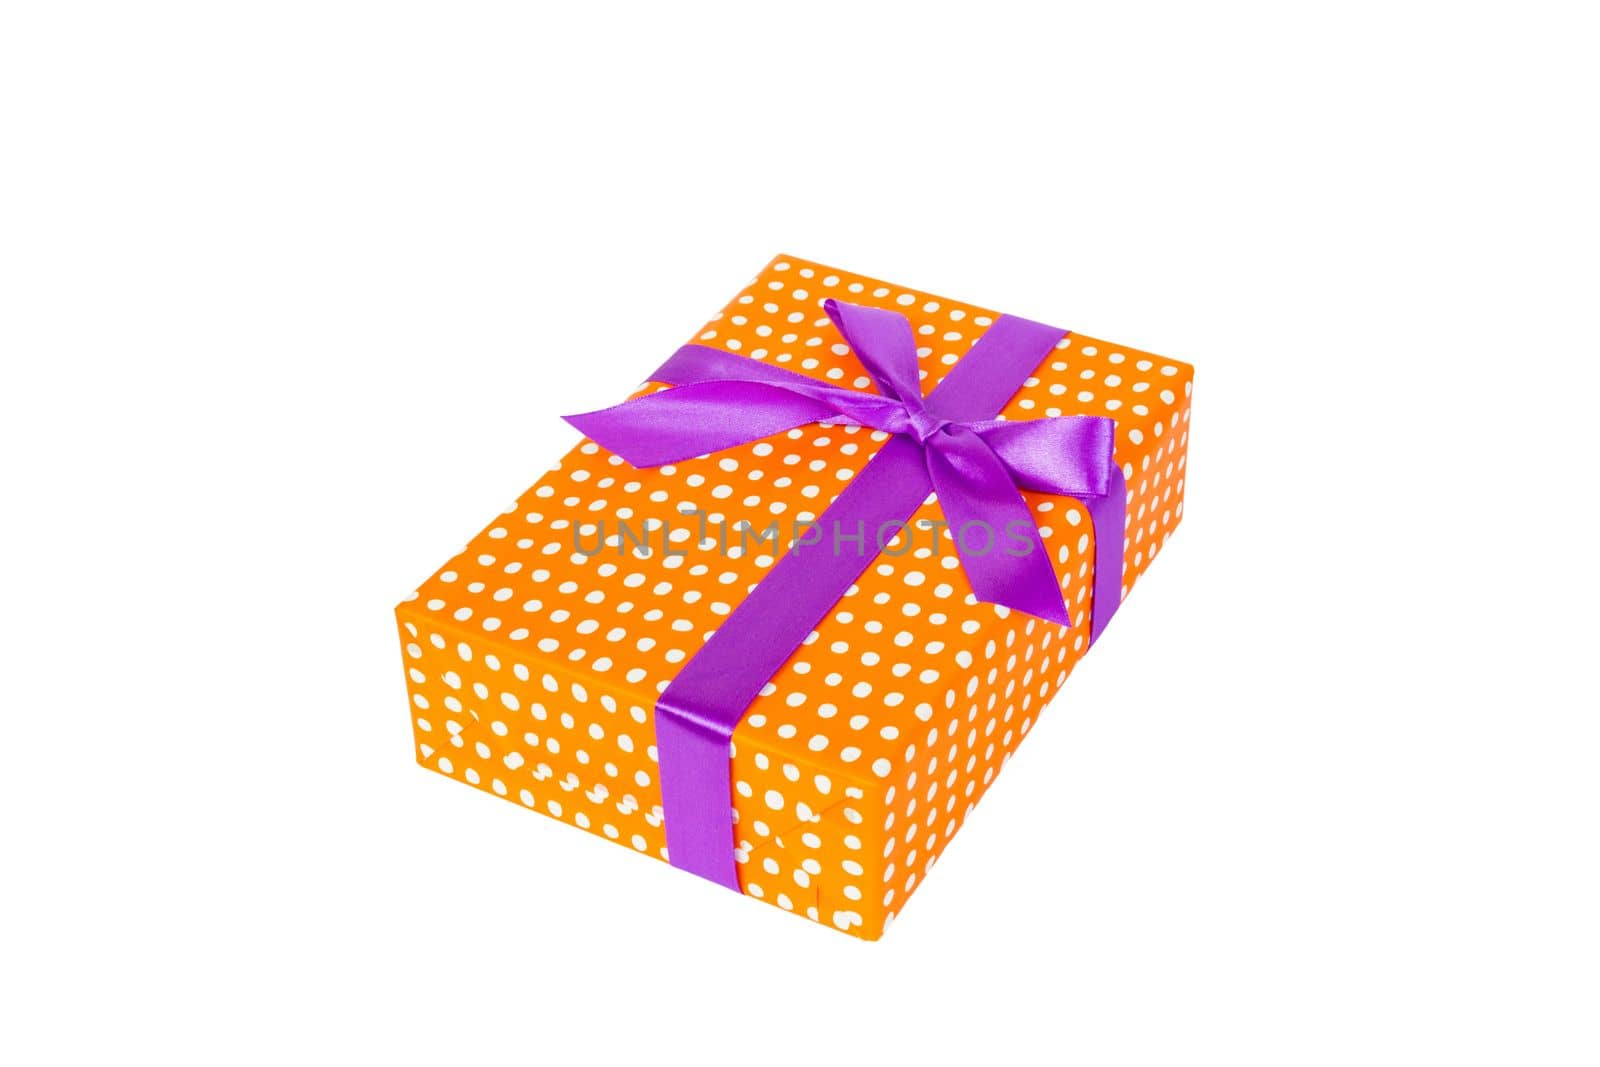 Christmas or other holiday handmade present in orange paper with purple ribbon. Isolated on white background, top view. thanksgiving Gift box concept.